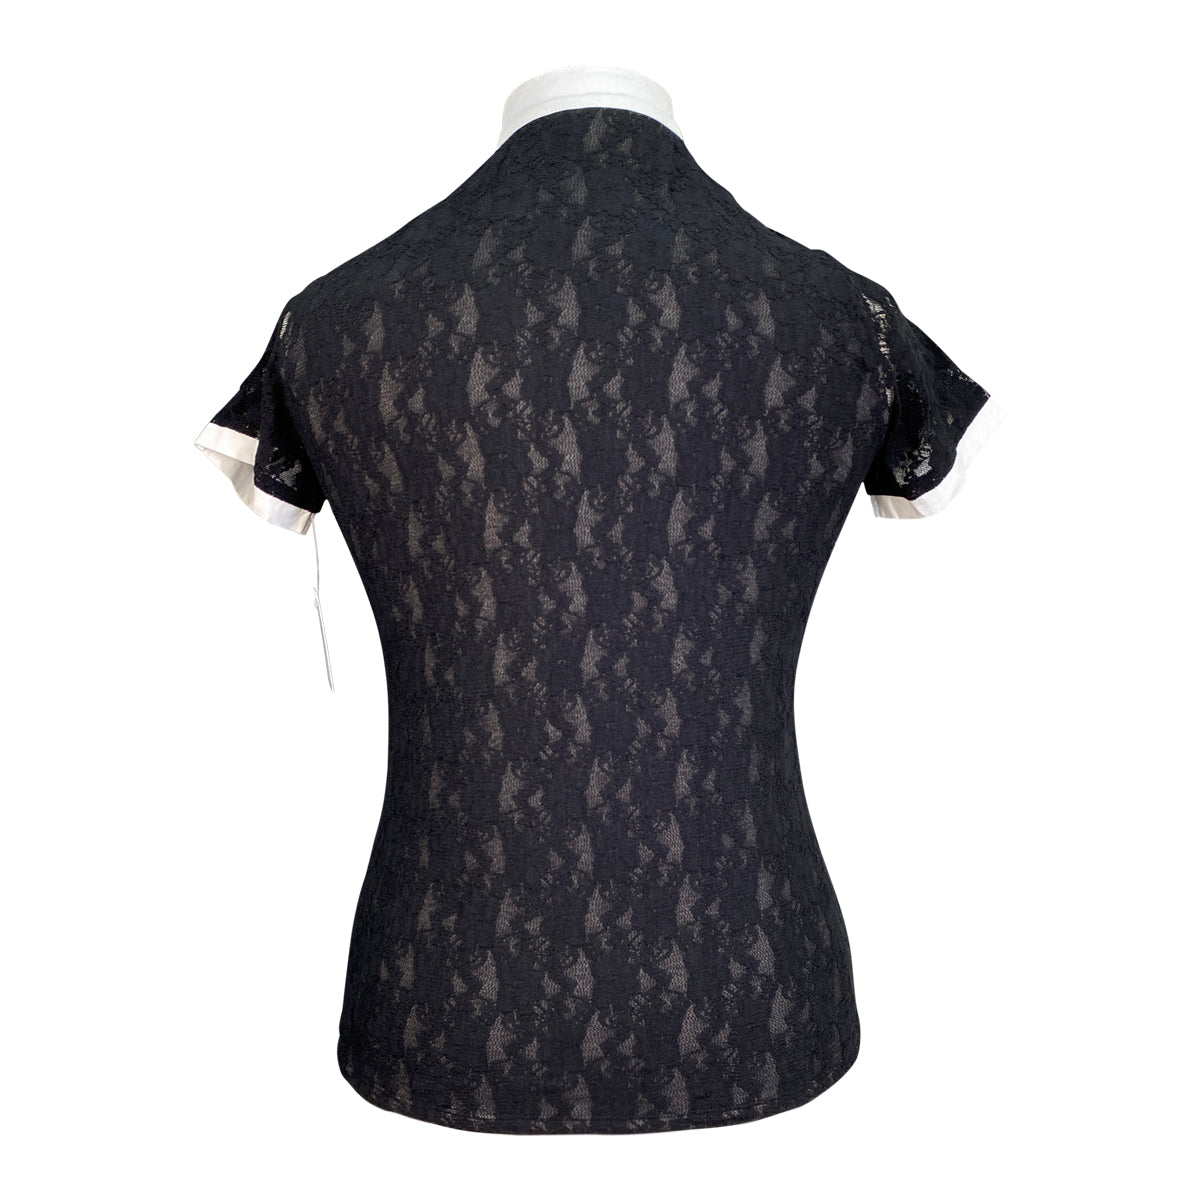 Montar 'Amelia' Lace Competition Shirt in Black